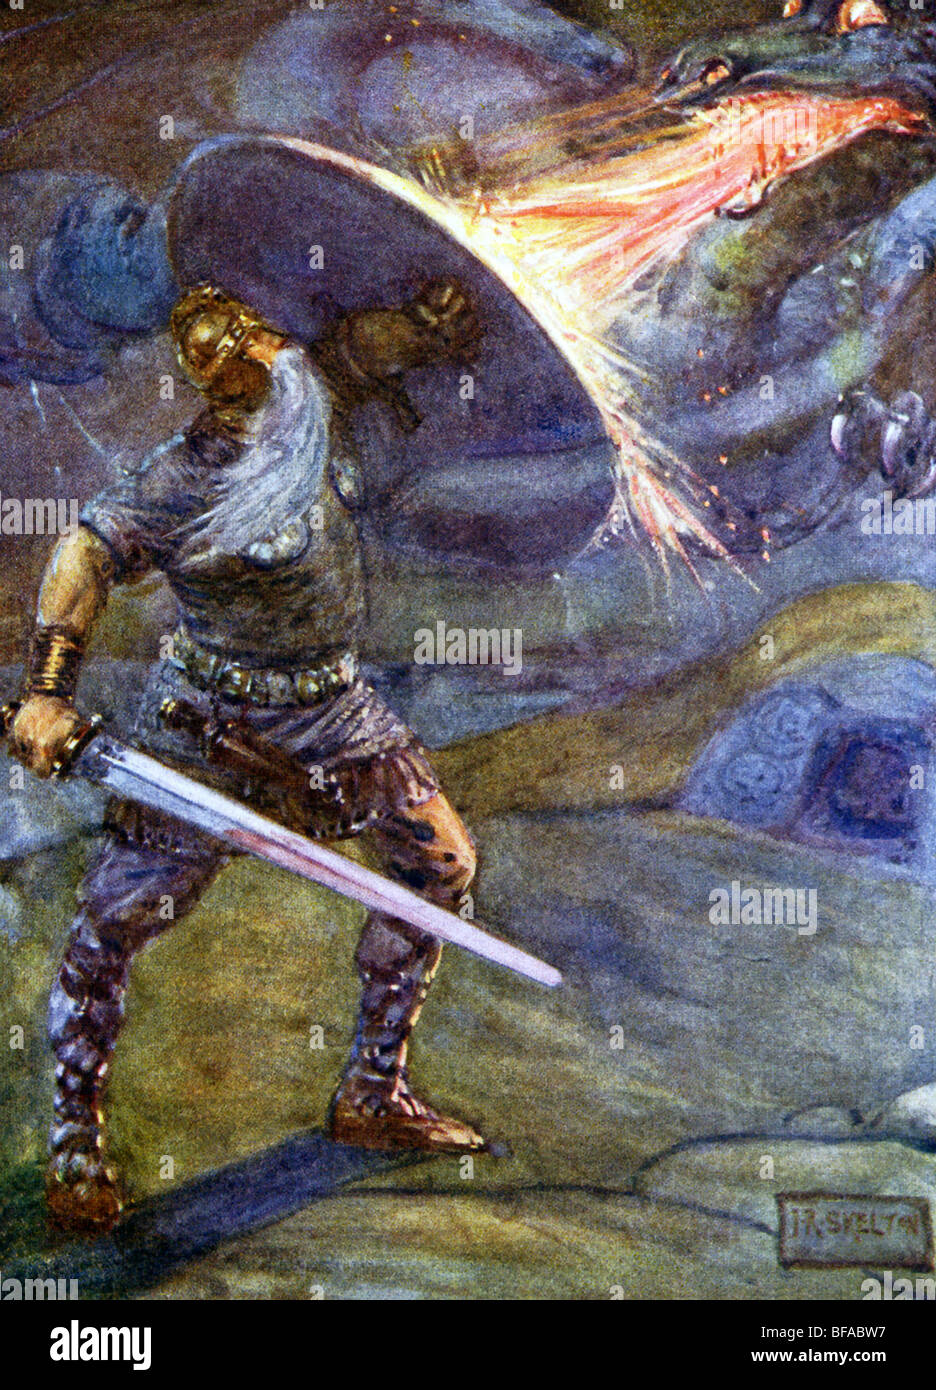 Beowulf.received the sword Naegling after defeating the monster Grendel, but it does not survive this fight with the dragon. Stock Photo